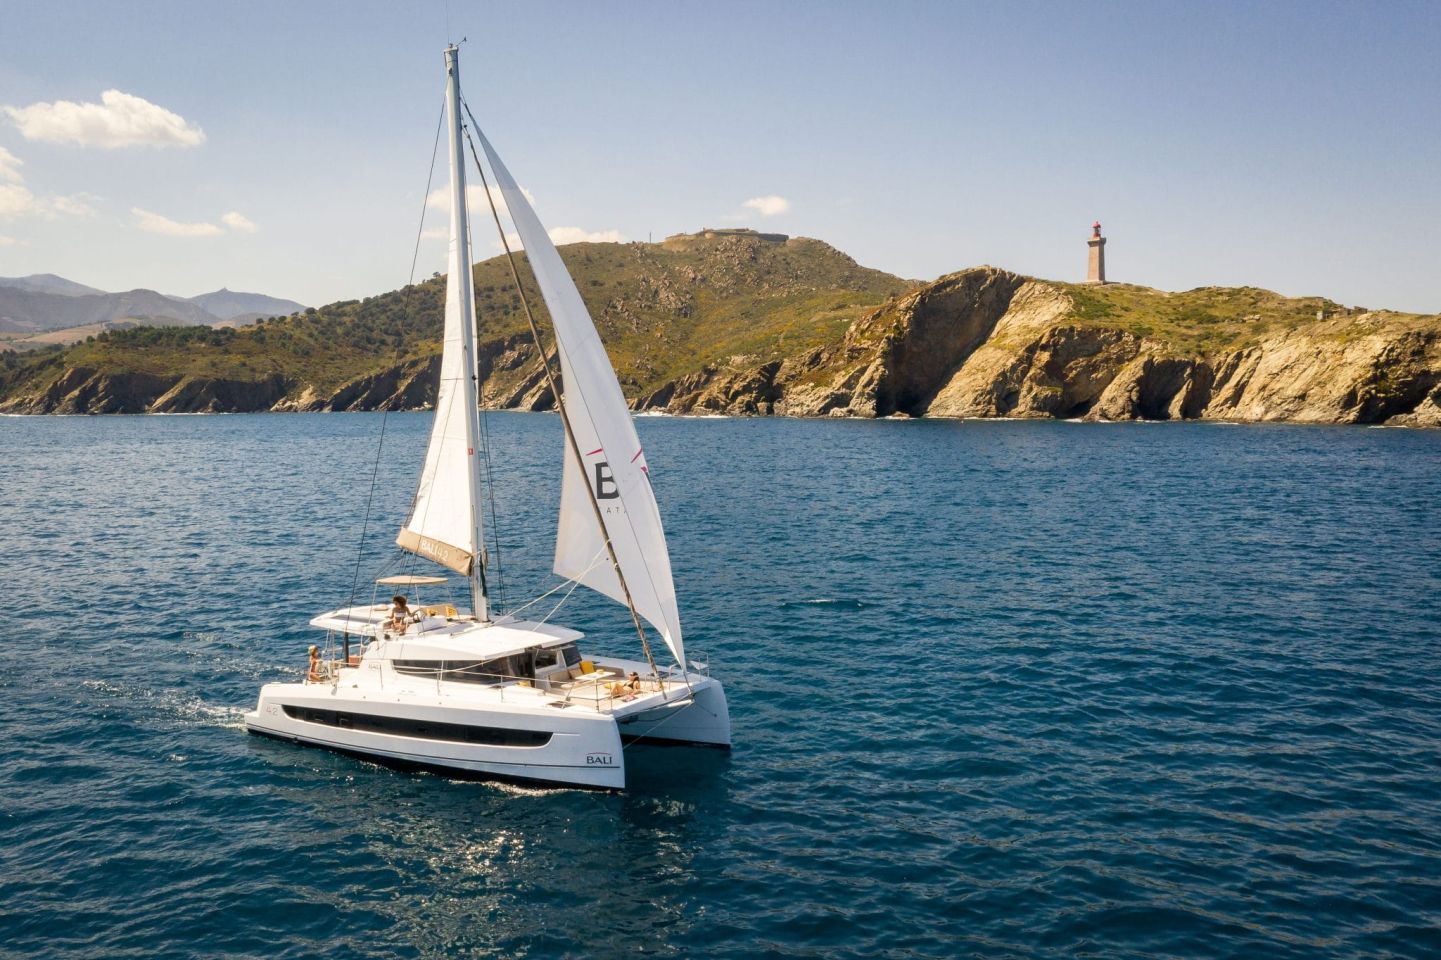 Bali 4.2 OW - Yacht Charter US Virgin Islands & Boat hire in US Virgin Islands St. Thomas East End Compass Point Marina 1